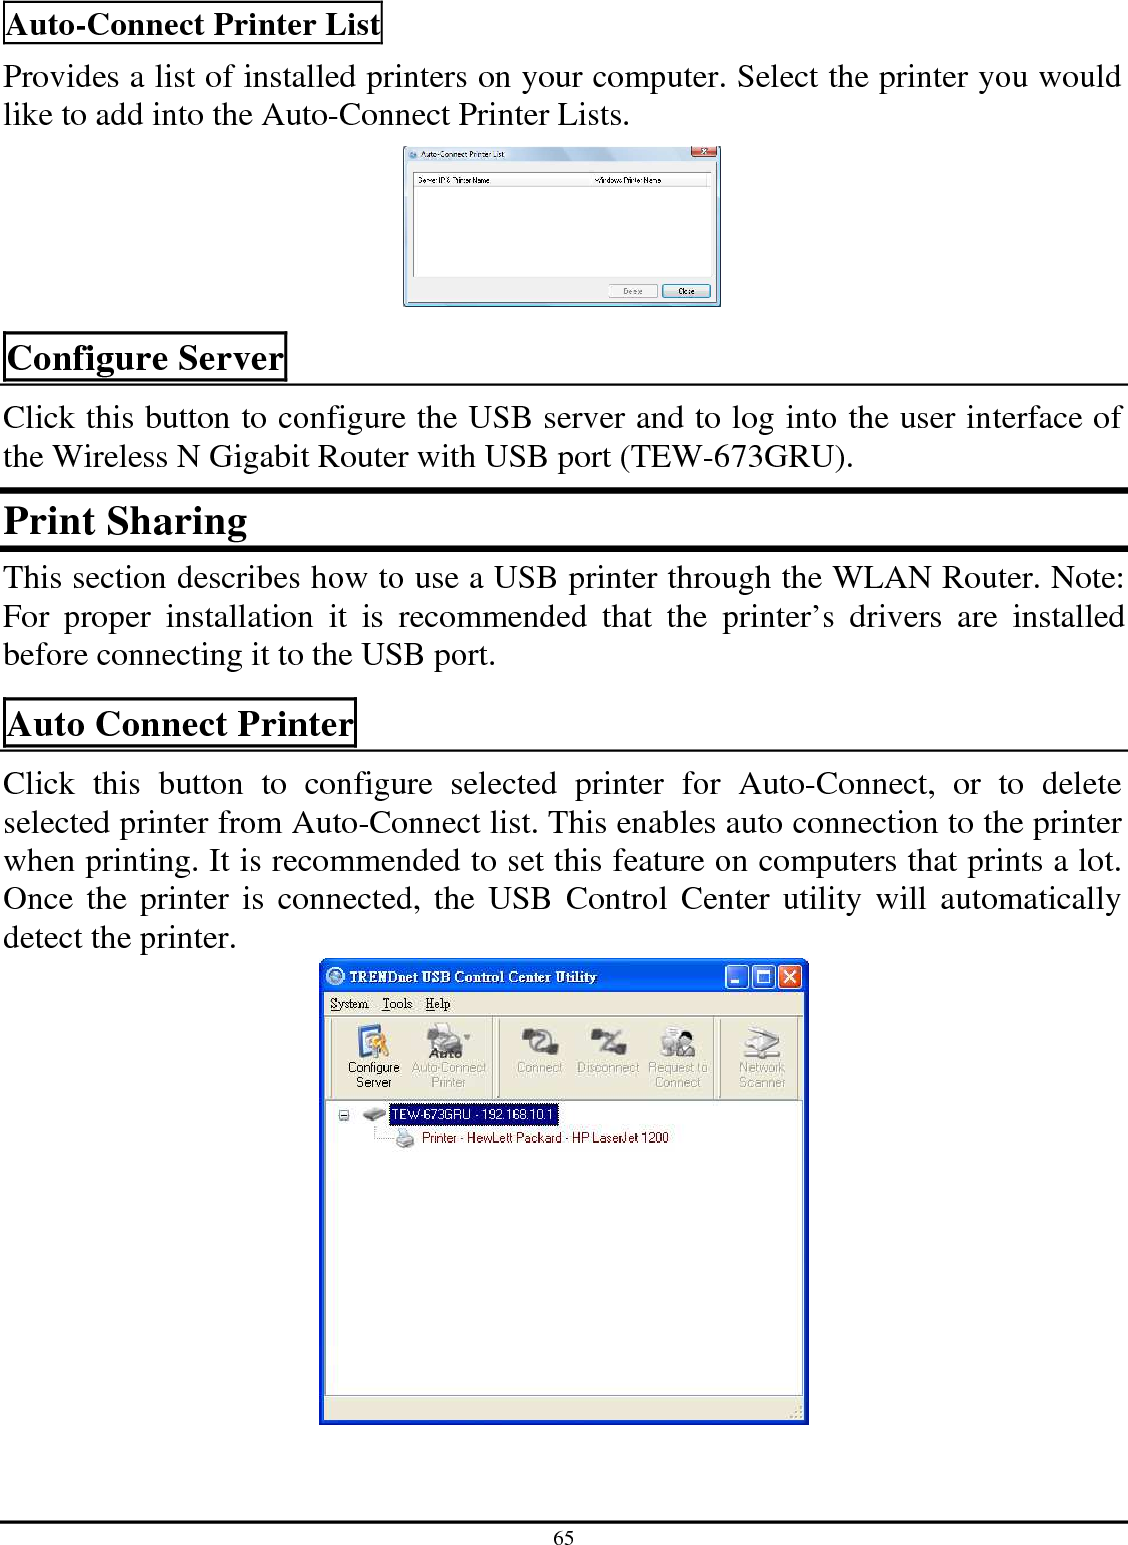 65 Auto-Connect Printer List Provides a list of installed printers on your computer. Select the printer you would like to add into the Auto-Connect Printer Lists.   Configure Server Click this button to configure the USB server and to log into the user interface of the Wireless N Gigabit Router with USB port (TEW-673GRU). Print Sharing  This section describes how to use a USB printer through the WLAN Router. Note: For  proper  installation  it  is  recommended  that  the  printer’s  drivers  are  installed before connecting it to the USB port. Auto Connect Printer  Click  this  button  to  configure  selected  printer  for  Auto-Connect,  or  to  delete selected printer from Auto-Connect list. This enables auto connection to the printer when printing. It is recommended to set this feature on computers that prints a lot.  Once the printer is connected, the USB Control Center utility will automatically detect the printer.    